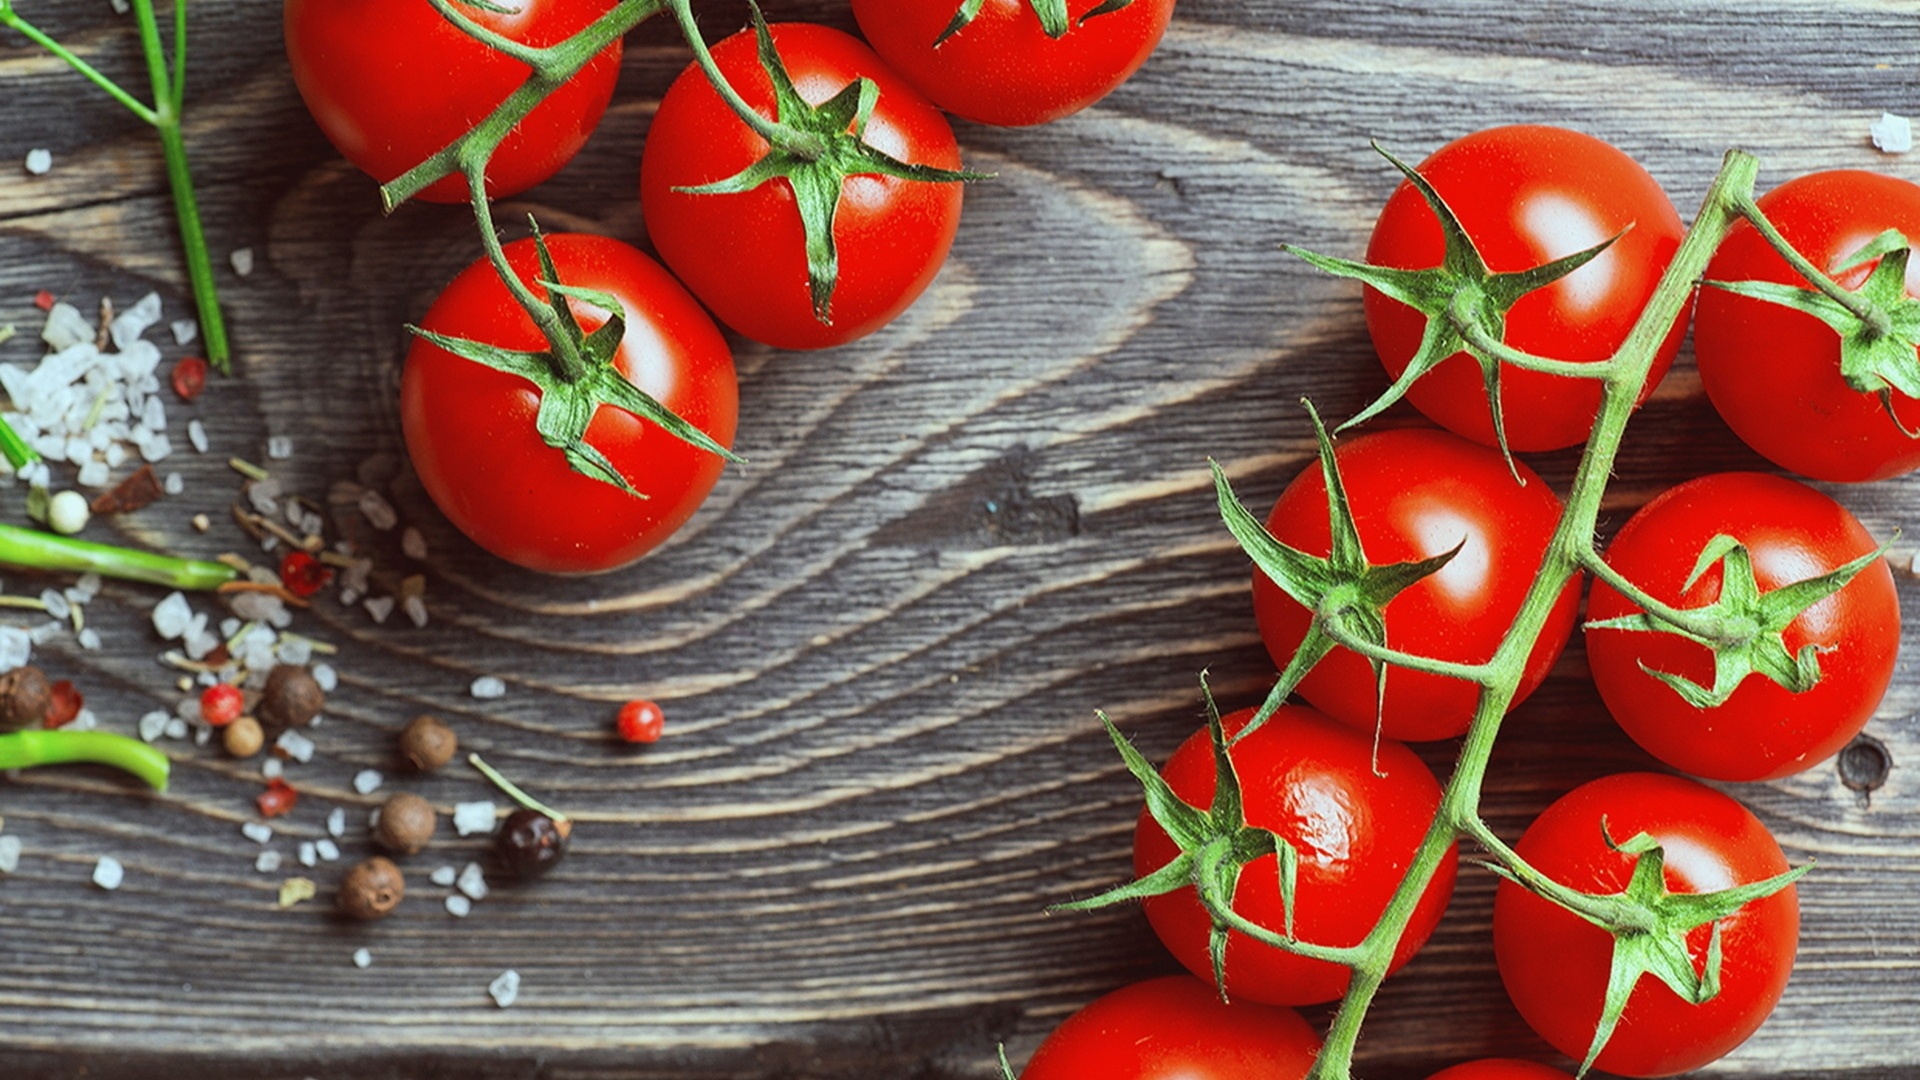 Tomatoes Background Wallpaper